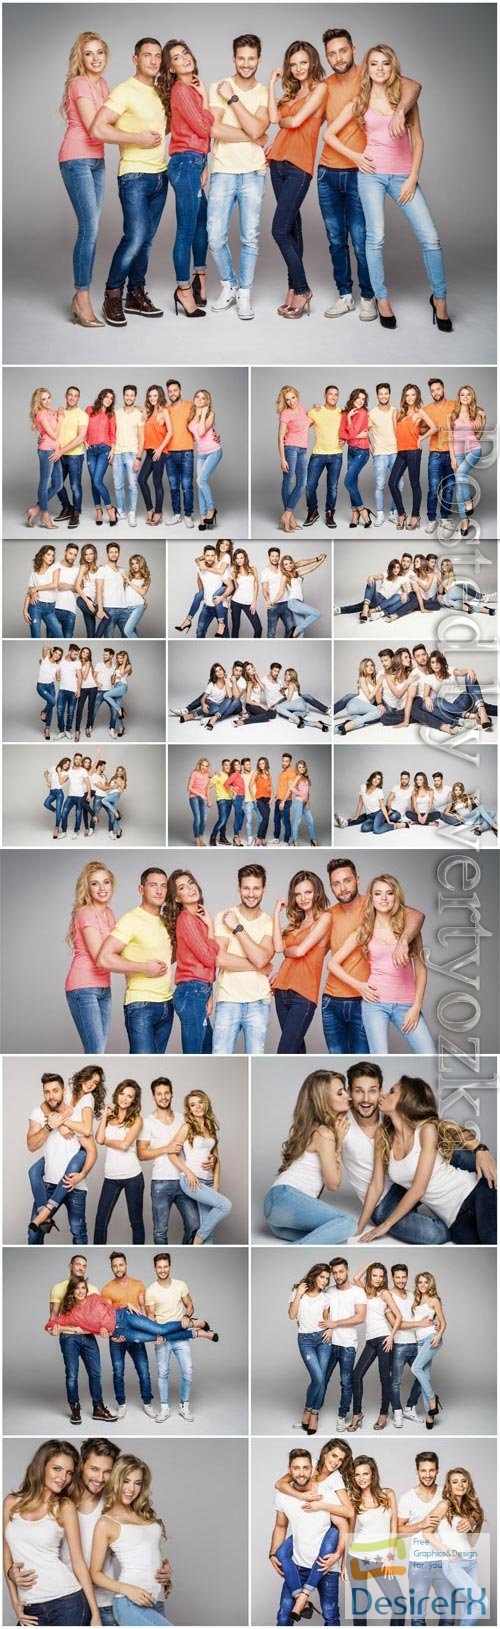 Stylish men and girls in jeans stock photo